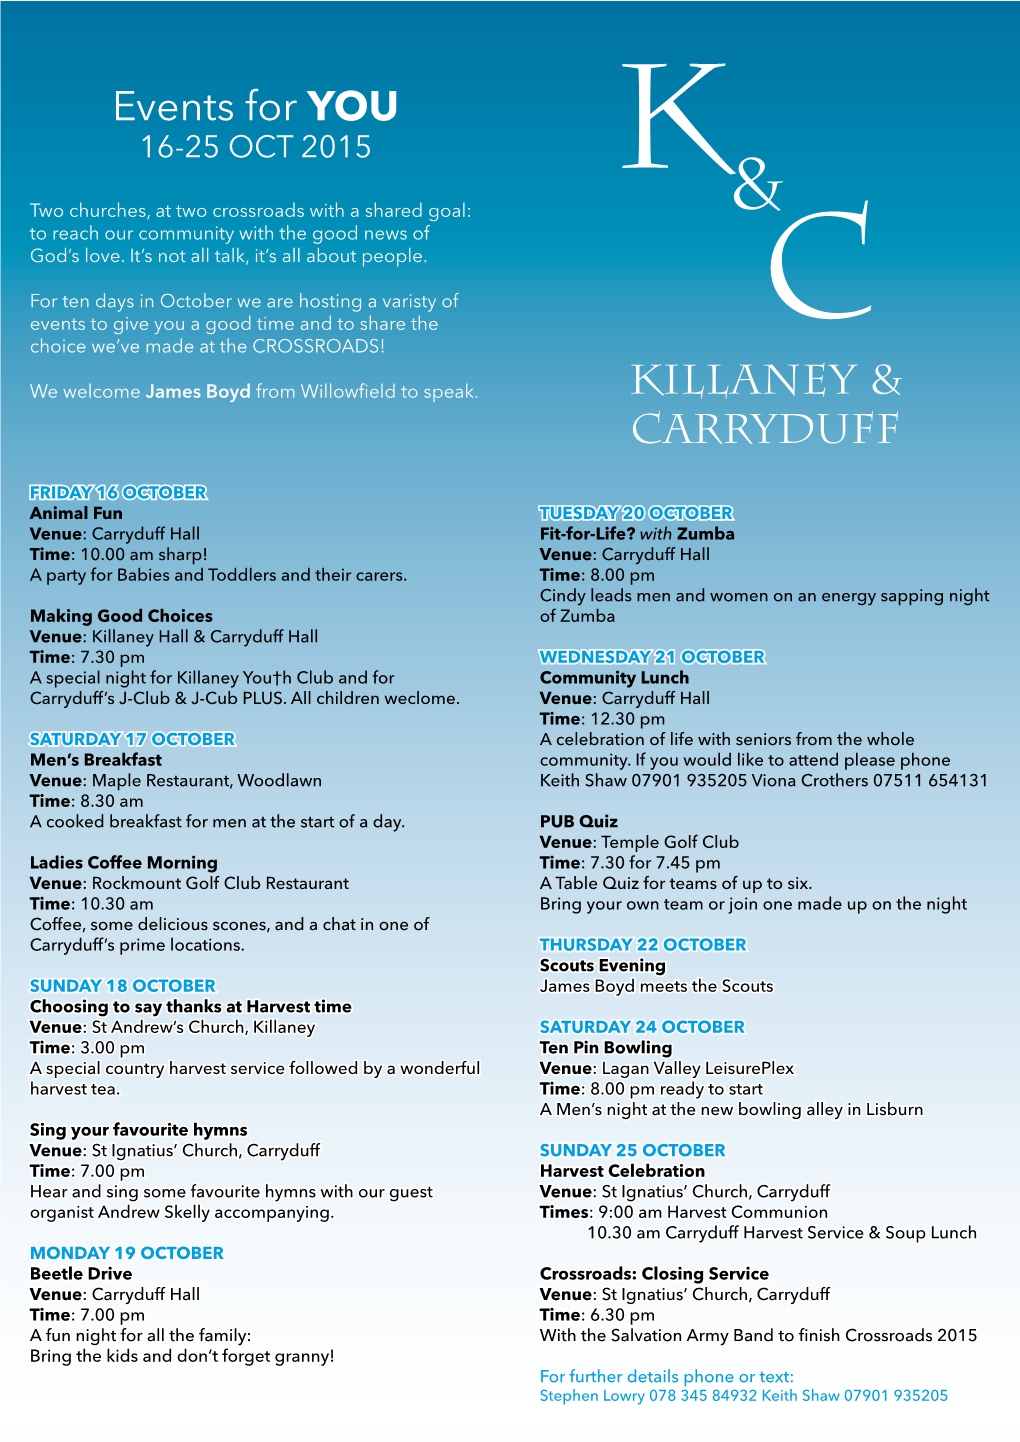 Events for YOU KILLANEY & CARRYDUFF